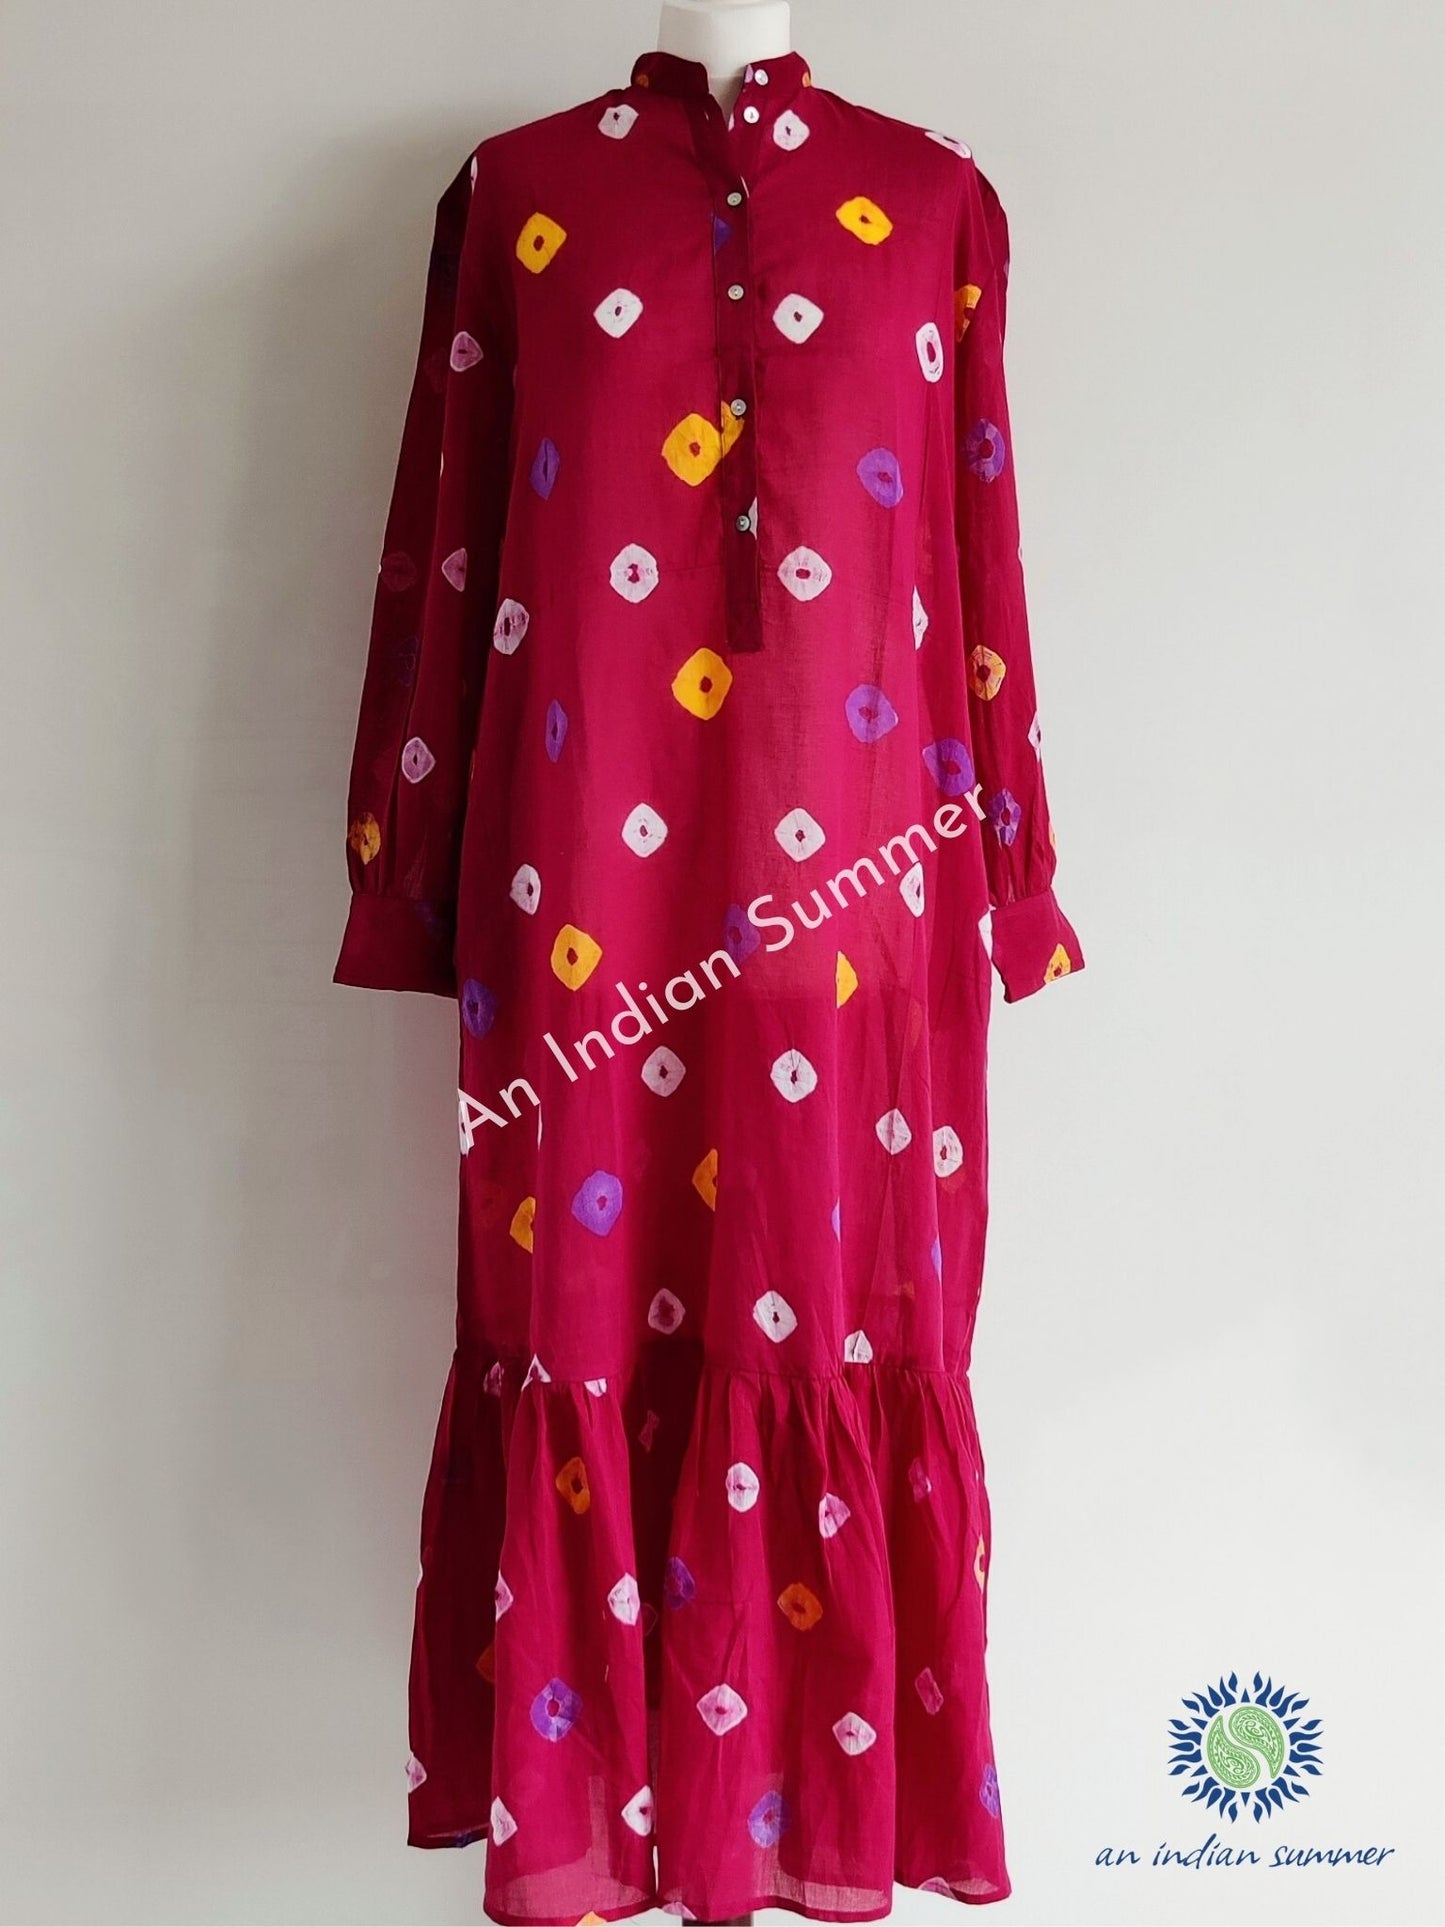 Aditi Bandhani Dress Garnet Red | Hand Tie Dyed | An Indian Summer | Seasonless Timeless Sustainable Ethical Authentic Artisan Conscious Clothing Lifestyle Brand